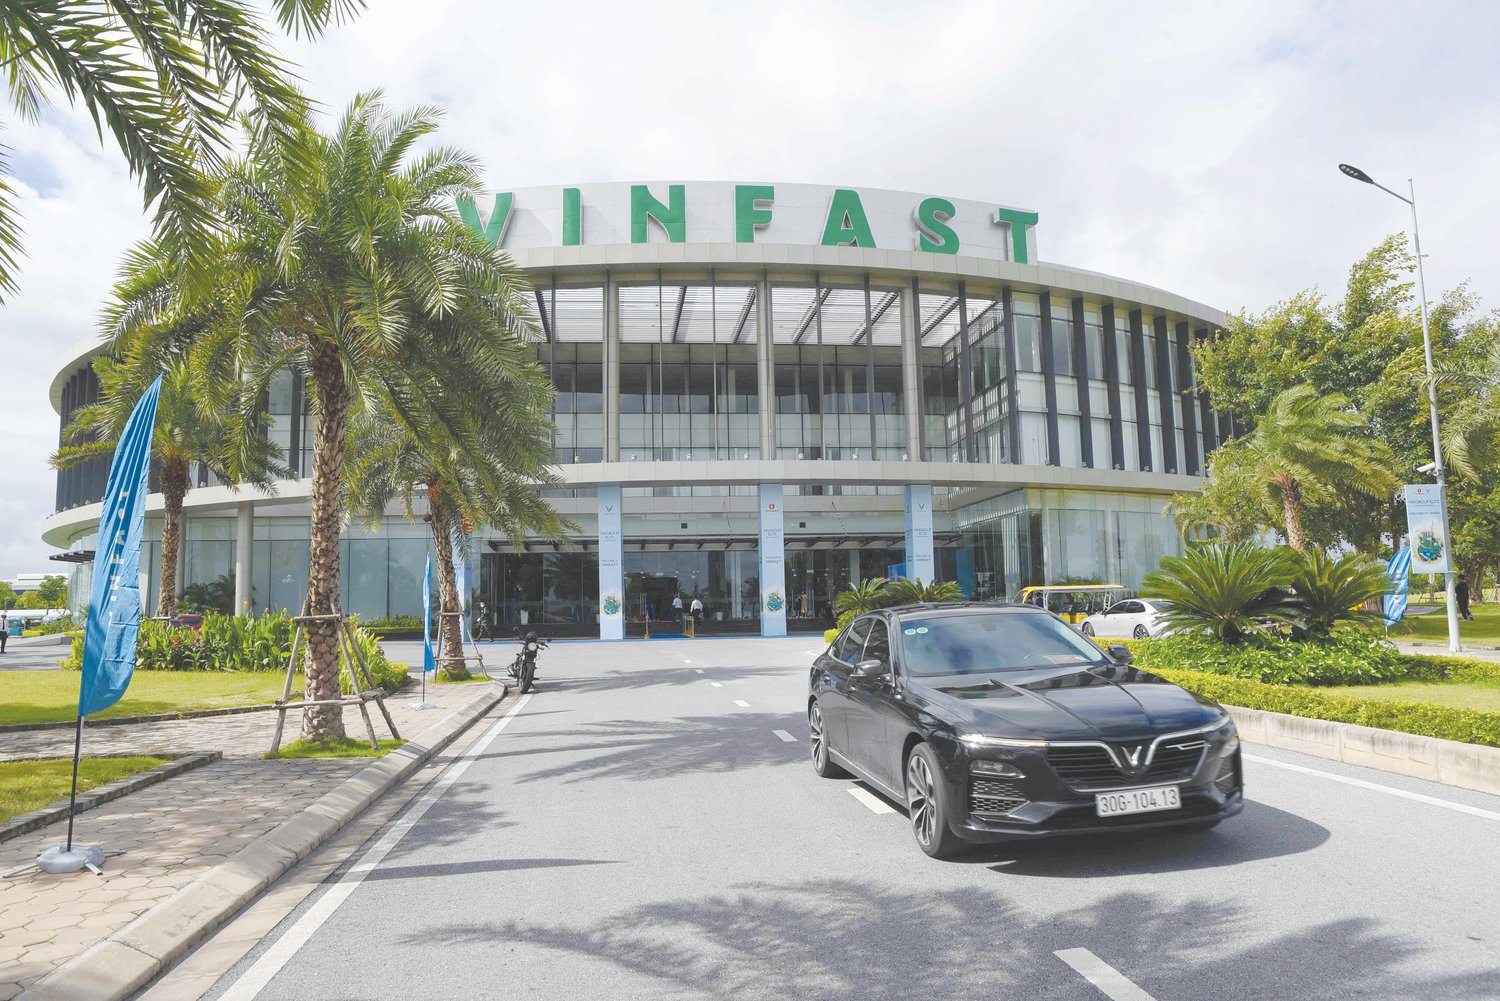 The VinFast manufacturing facility in Haiphong, Vietnam, is more than 800 acres in size. The site being built in Moncure is more than twice that size at 1,765 acres, according to the land deed signed last Wednesday.